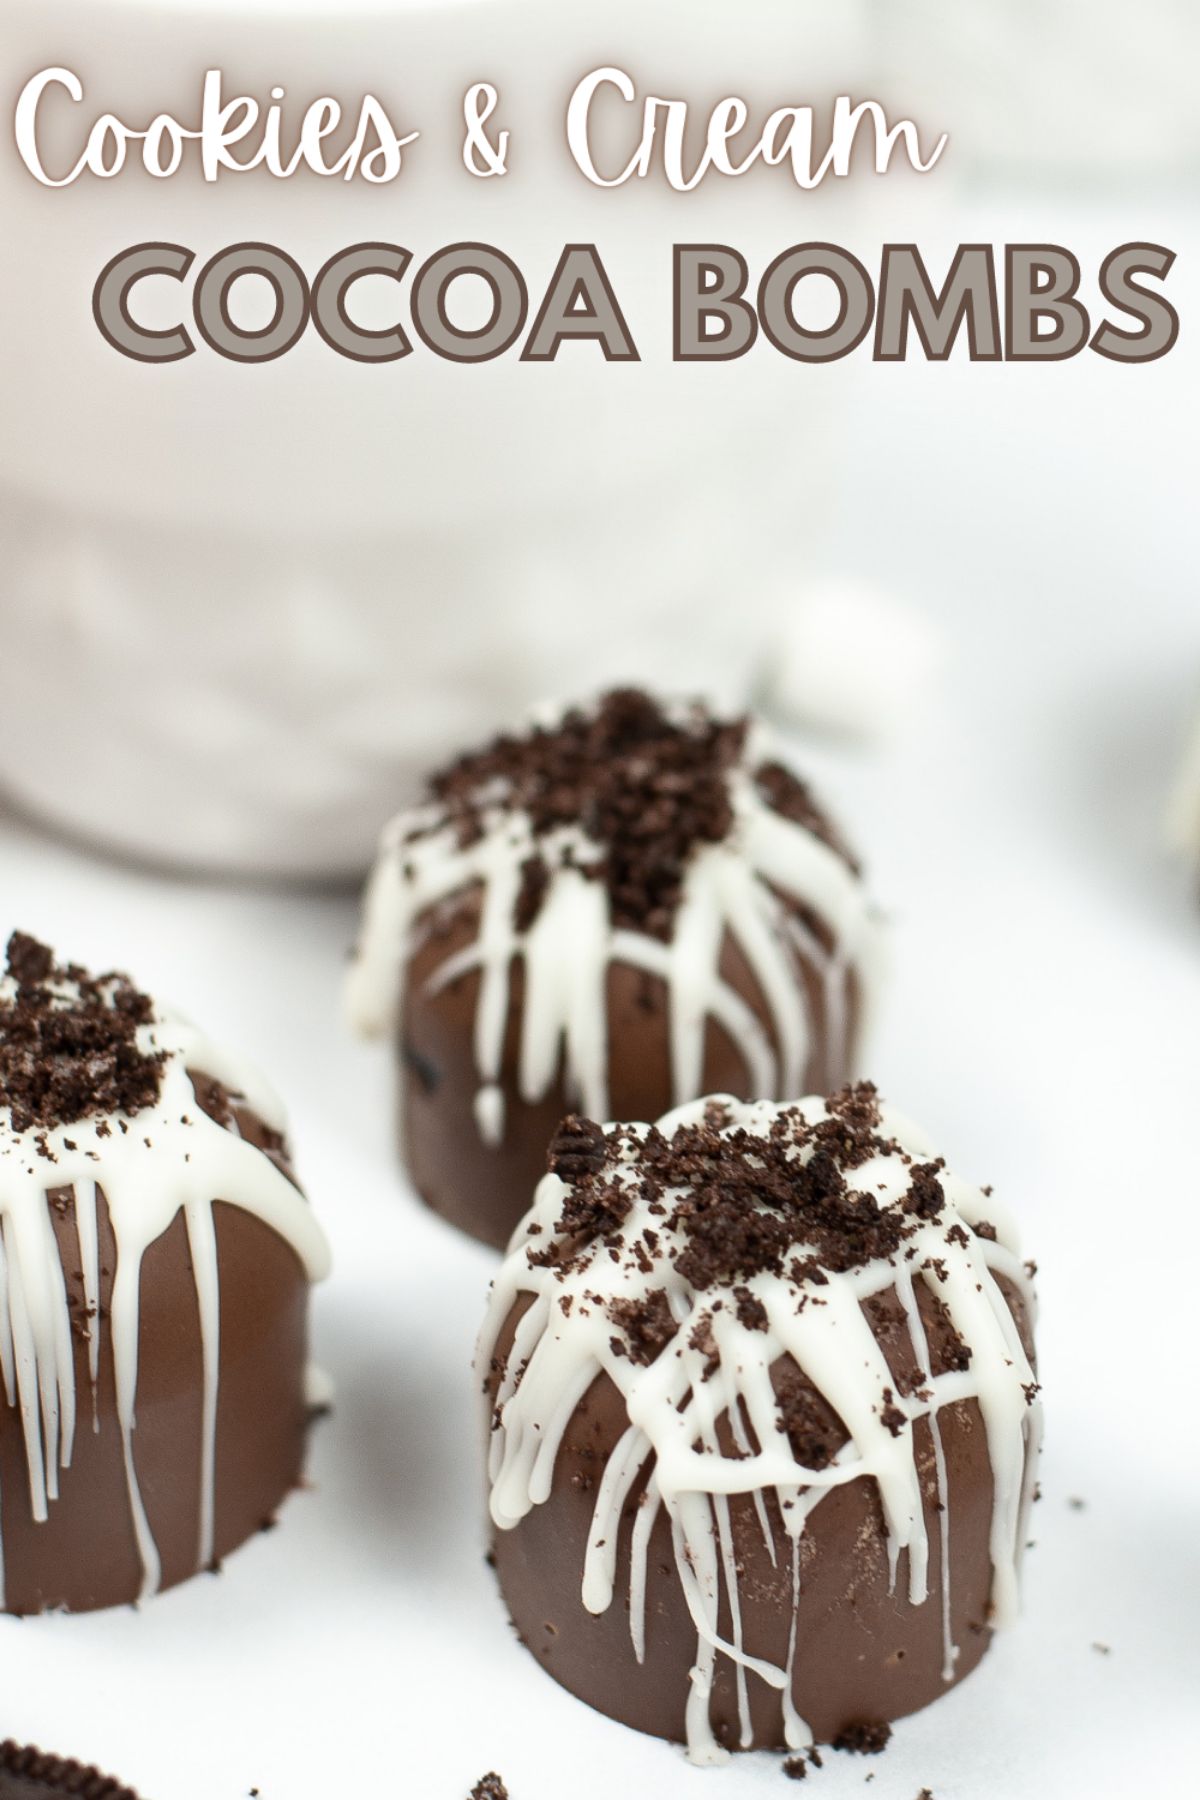 A vertical image of Cookies and Cream Hot Cocoa Bombs with a text at the top of the image saying "Cookies and Cream Cocoa Bombs"